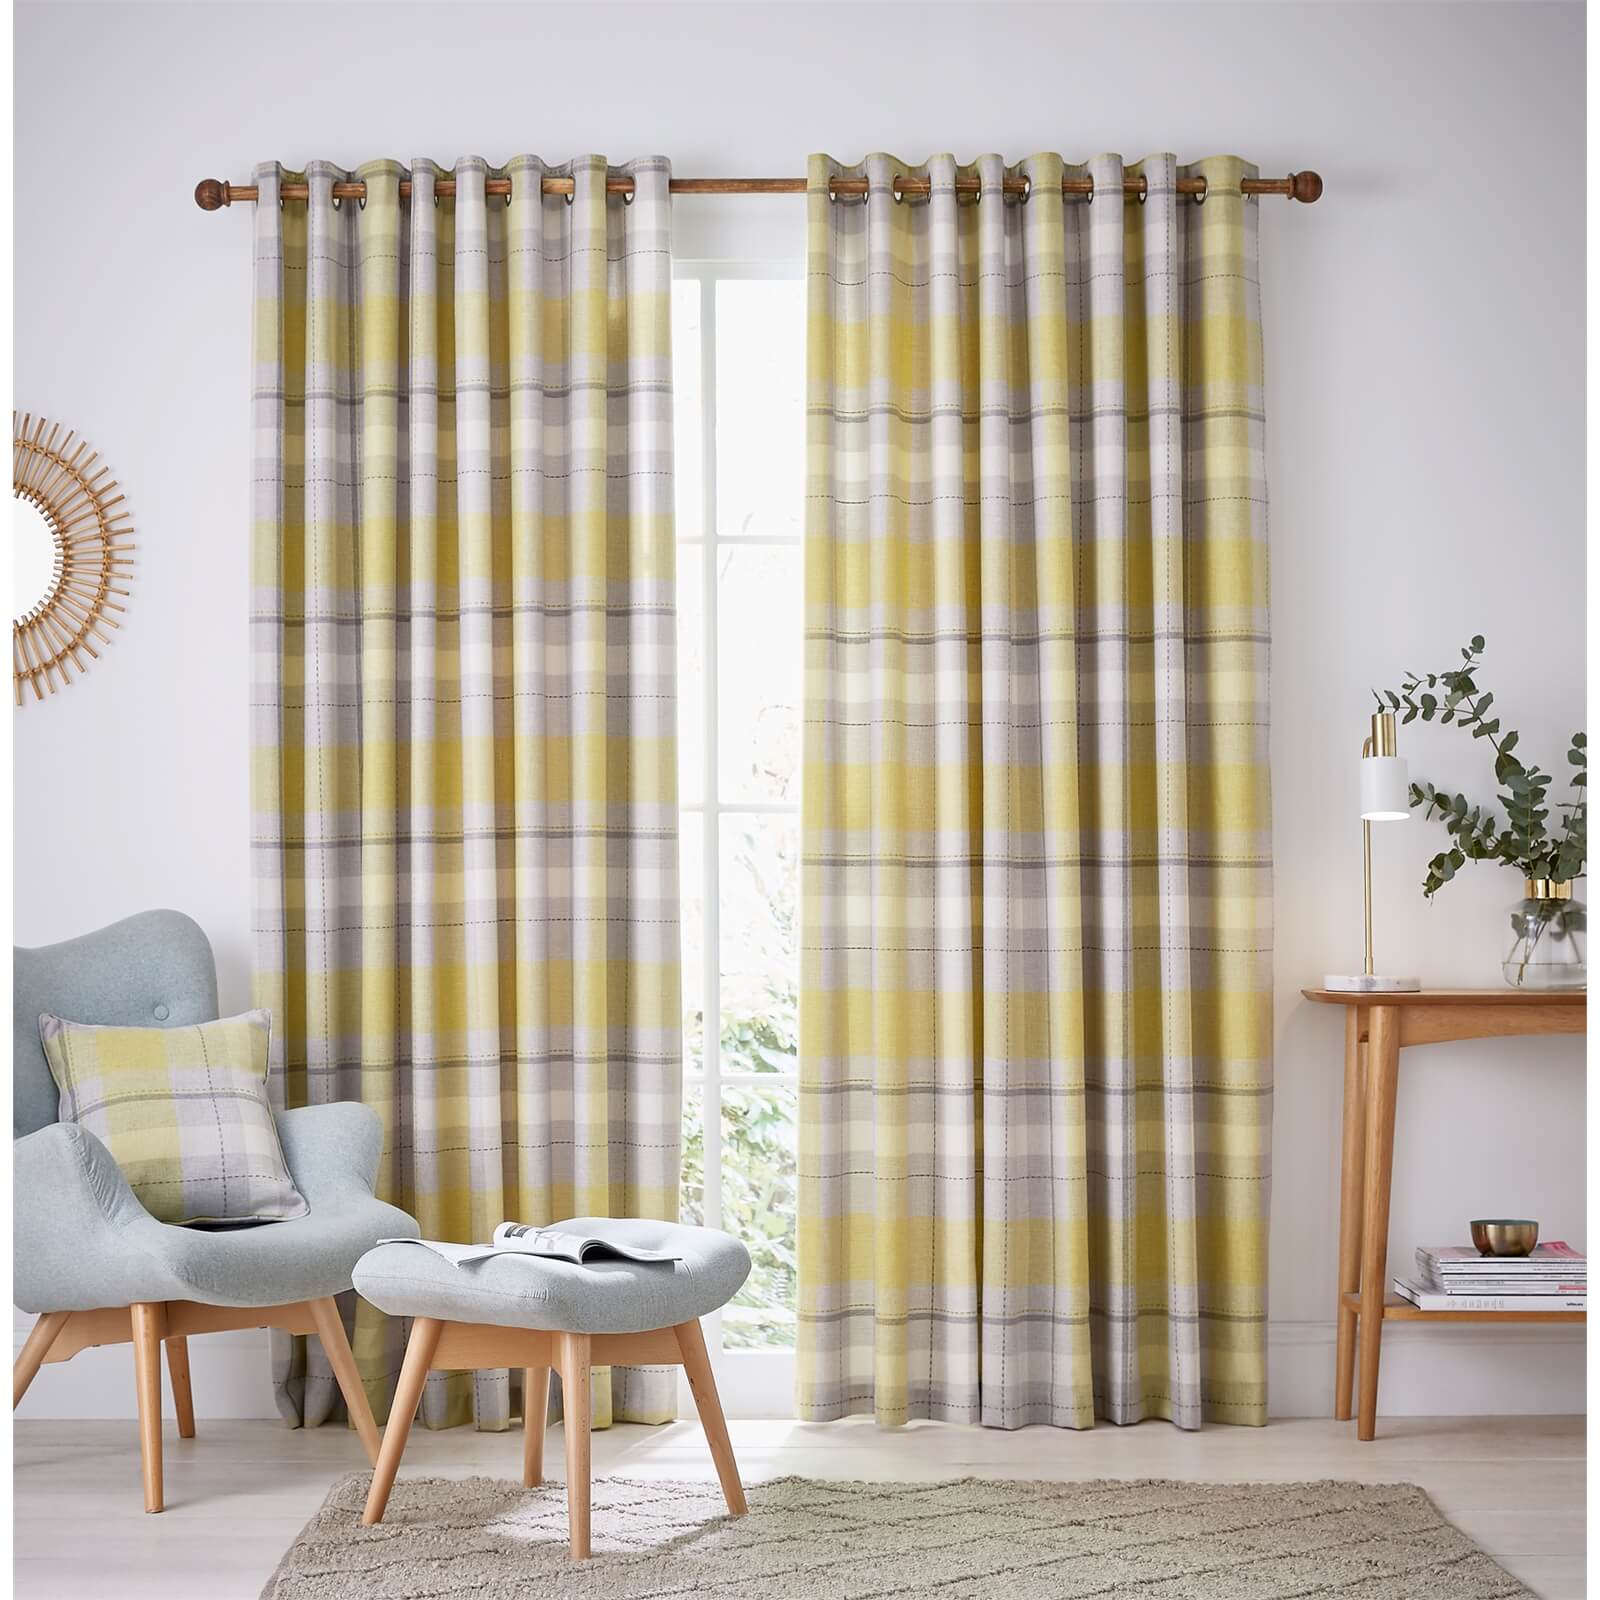 Helena Springfield Nora Lined Curtains 90 x 72 - Chartreuse